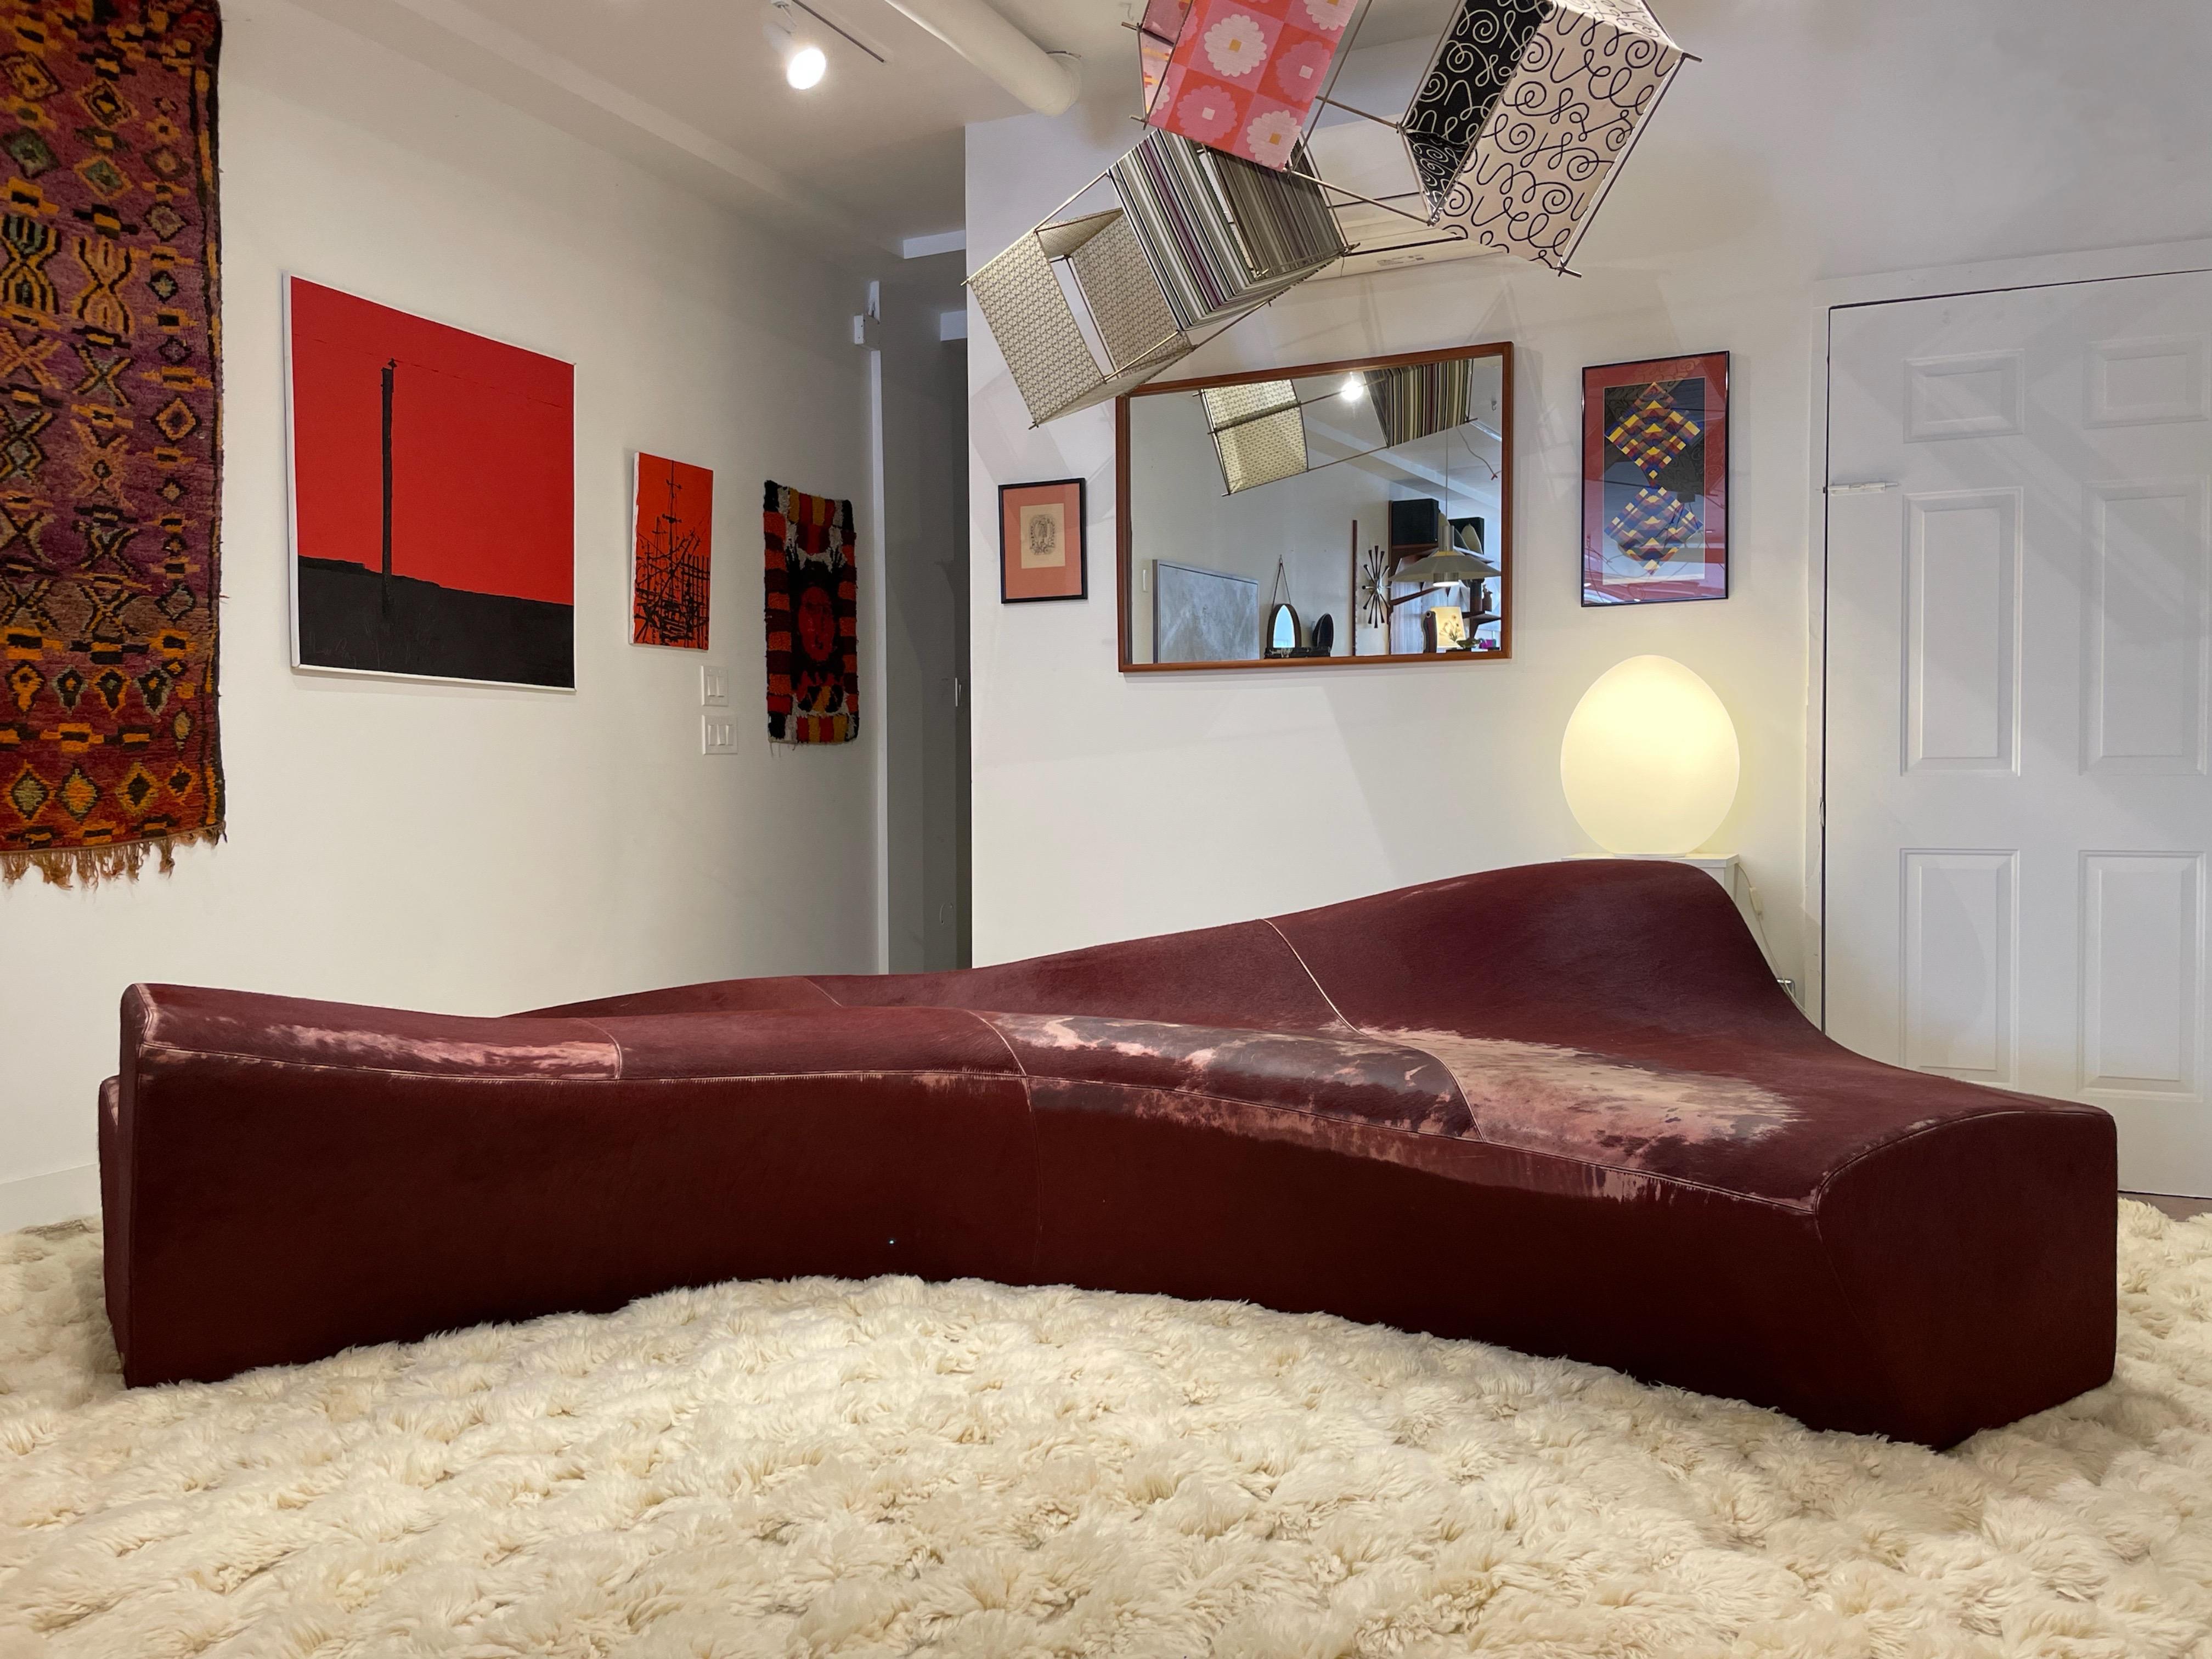 Out of this world piece by iconic British-Iraqi architect Zaha Hadid. The Moraine sofa was designed in 2000, and produced by Sawaya & Moroni of Italy. Organic curves wrapped in merlot pony ‘fantasy leather’, a specialty hide produced by Sawaya &